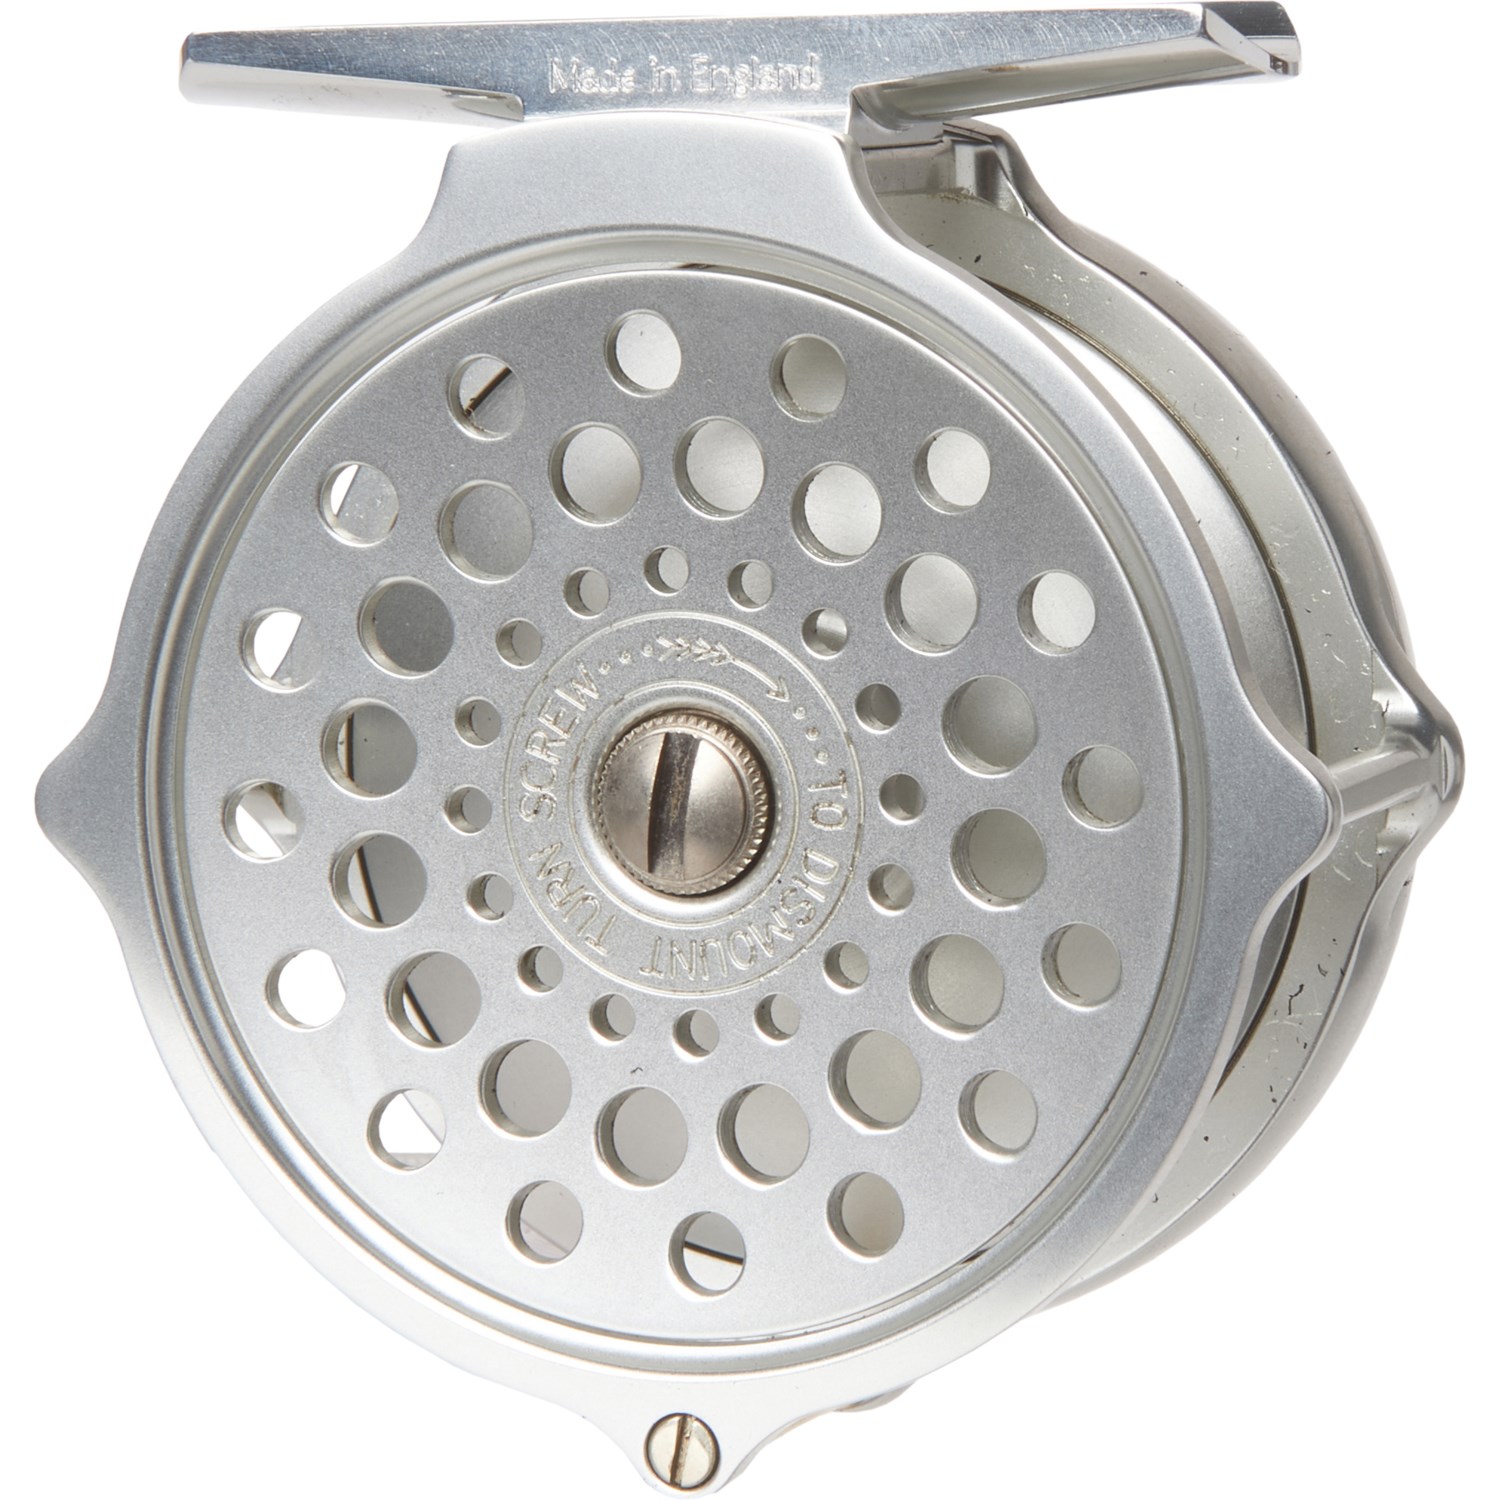 Hardy Made in England Baby Bougle Heritage Freshwater Fly Reel